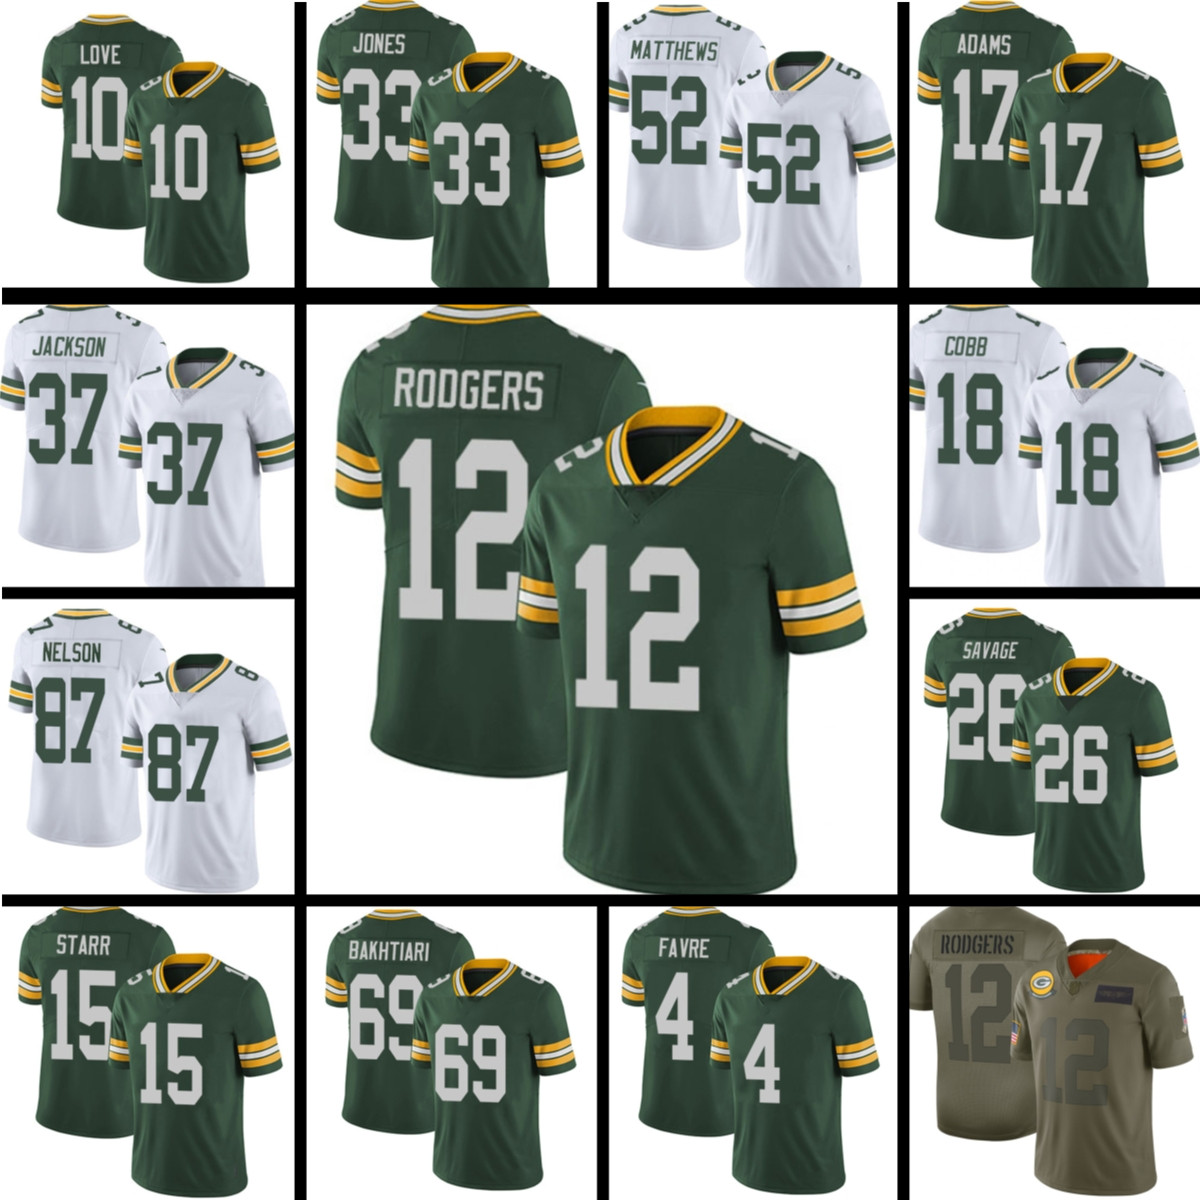 

12 Aaron Rodgers Jersey GreenBaysPackersMen Josh Myers Aaron Jones Eric Stokes Davante Adams Amari Rodgers Allen Lazard Randall Cobb Benkert Kylin Hill, Men(bao zhuang gong)